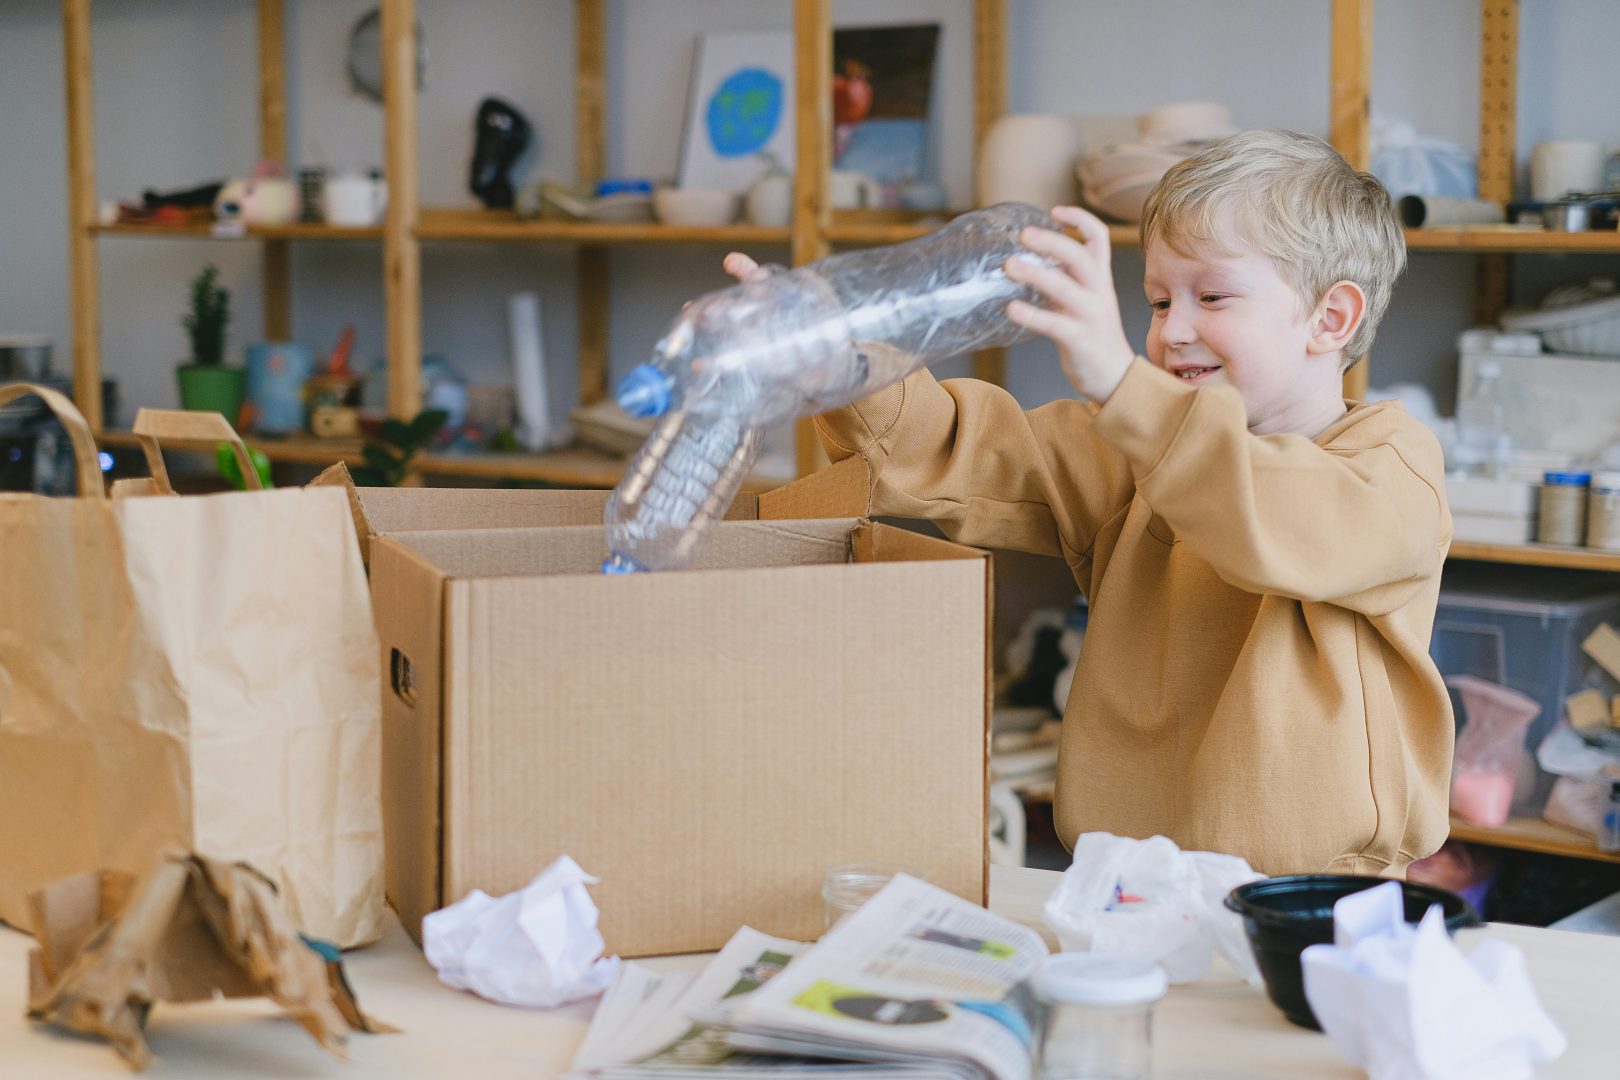 A young boy in a beige hoodie smiling as he takes a large plastic bottle out of a cardboard box in a room with shelves and various items scattered around.